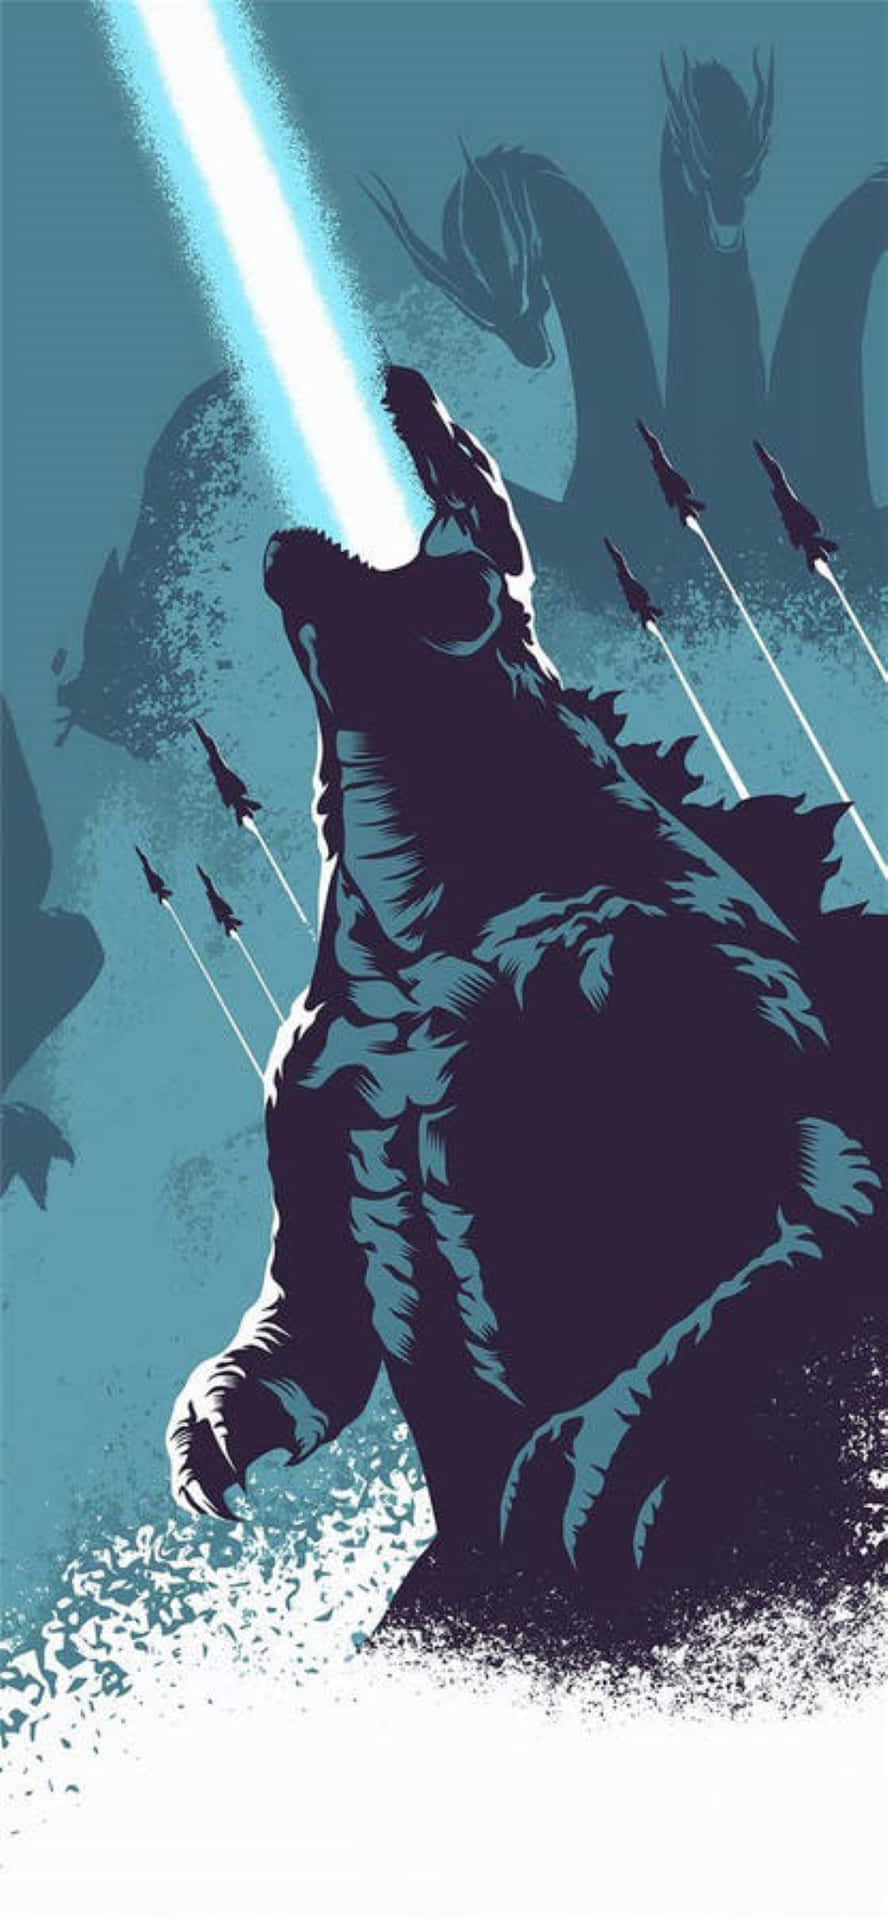 Godzilla unleashes its fearsome atomic breath in a stunning display of power Wallpaper